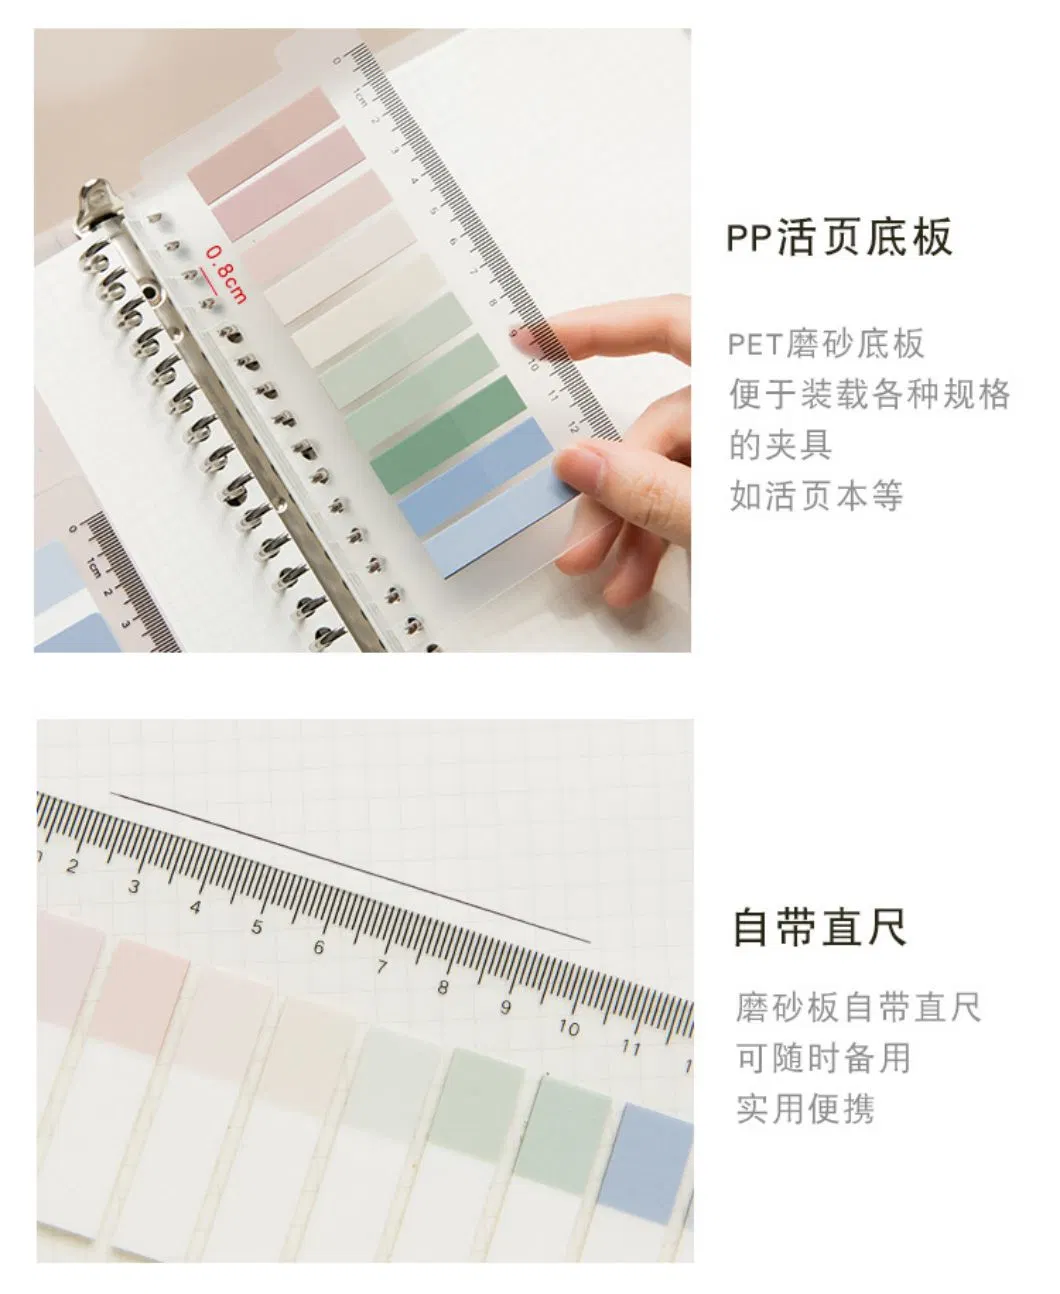 Morandi PET Index Color Sticker Tear Students Transparent Tabs Book Label Sticky Notes for Custom Page Markers, Memo Pad